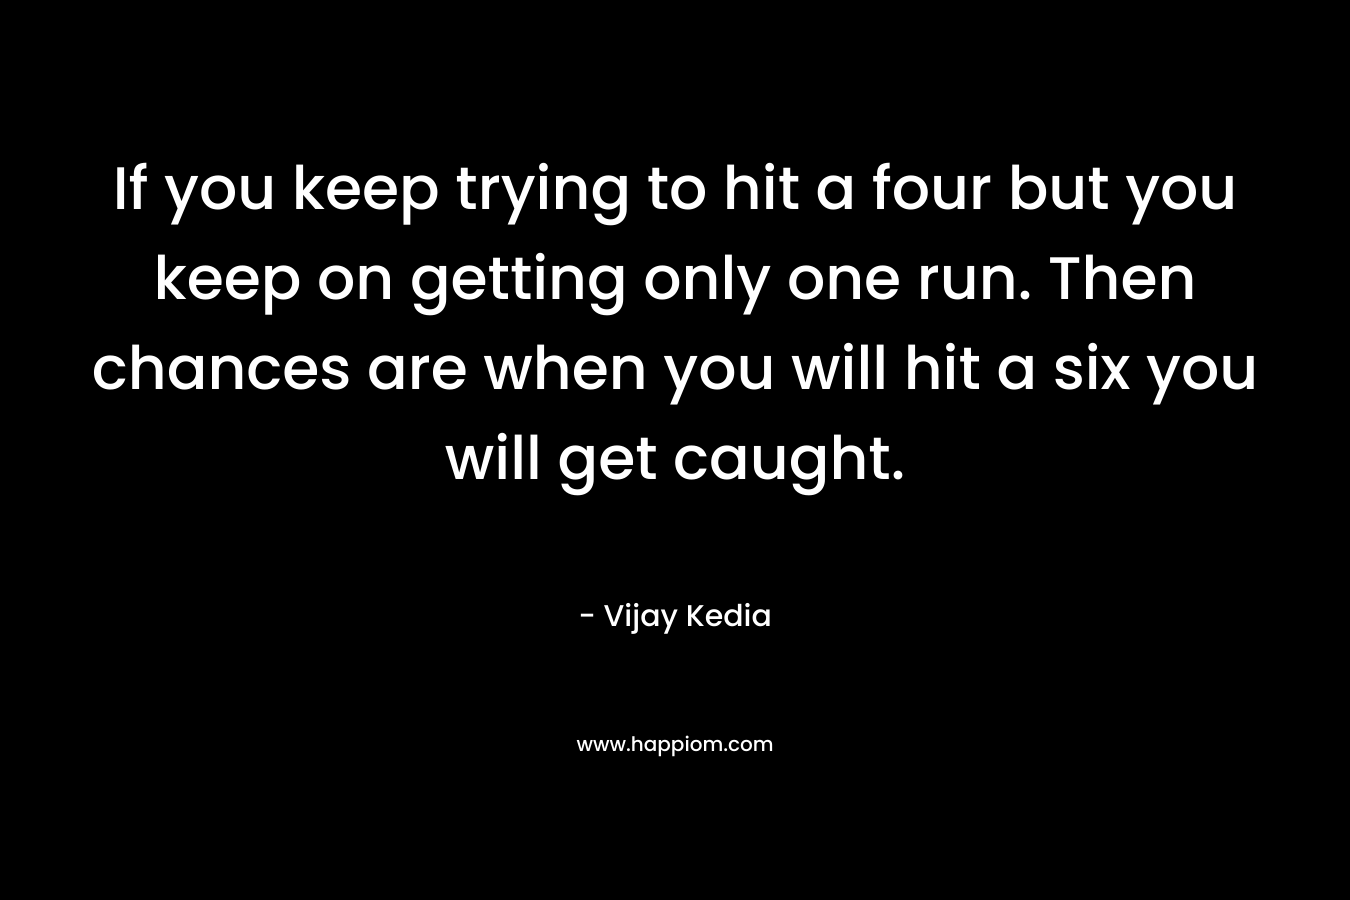 If you keep trying to hit a four but you keep on getting only one run. Then chances are when you will hit a six you will get caught.